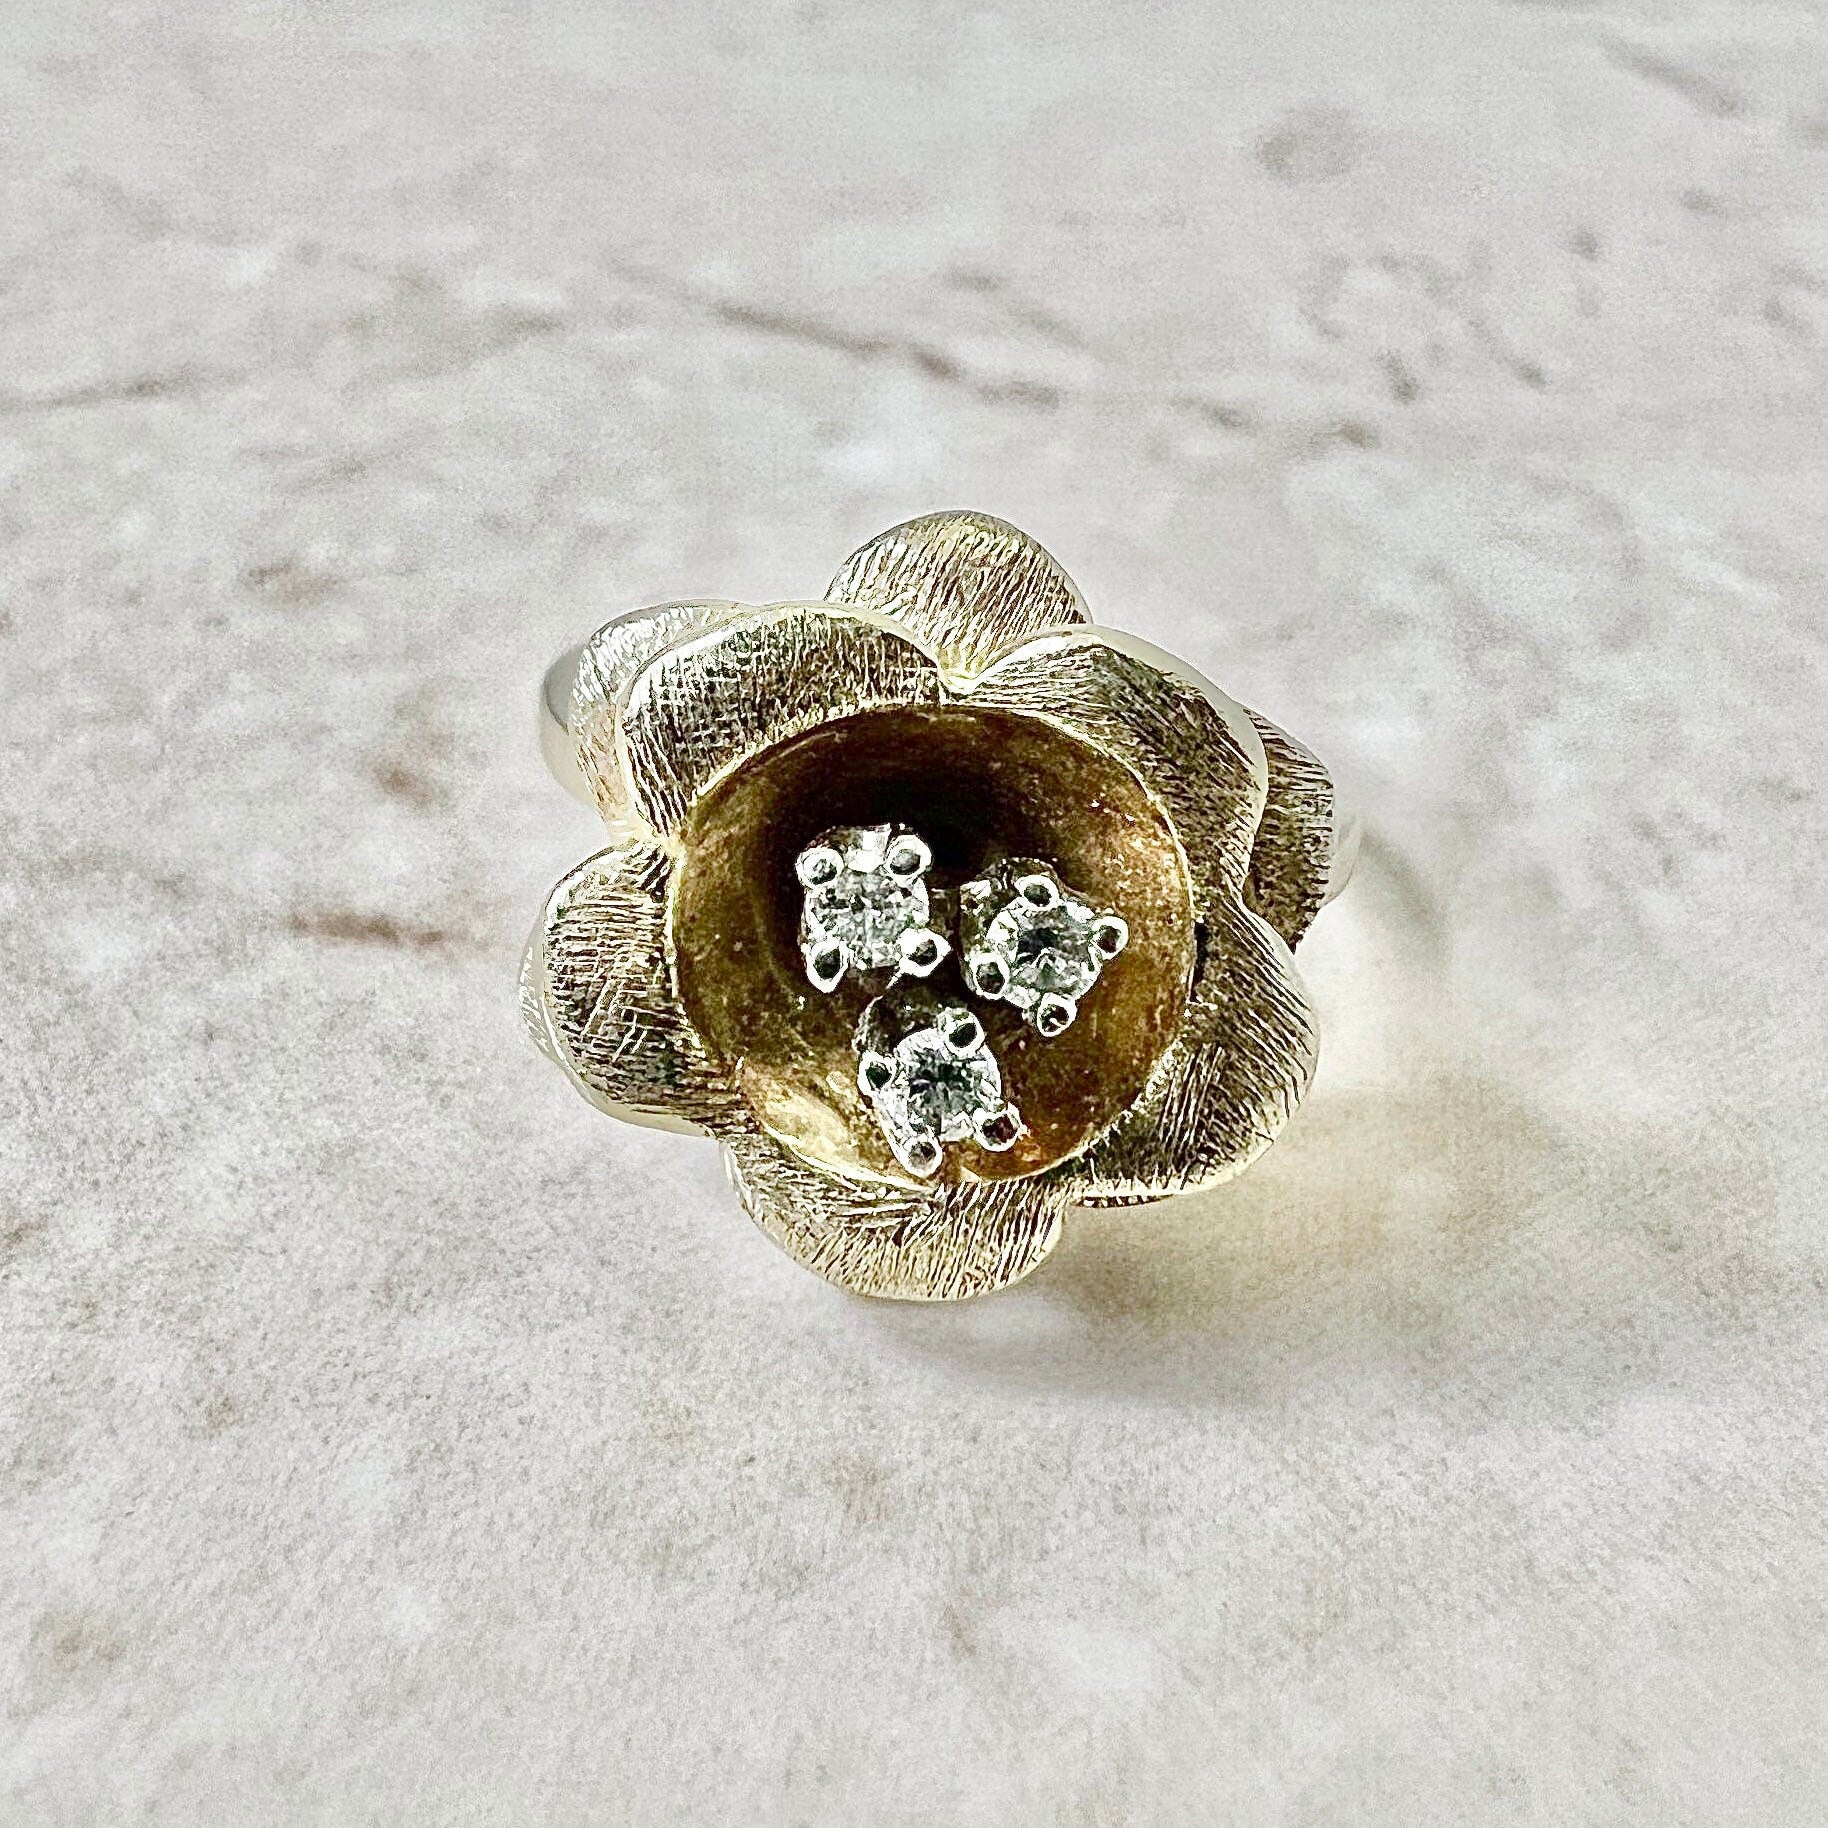 Vintage 14K Diamond Flower Cocktail Ring - Yellow Gold Diamond Ring - Statement Ring - Birthday Gift - Christmas Gift - Holiday Gift